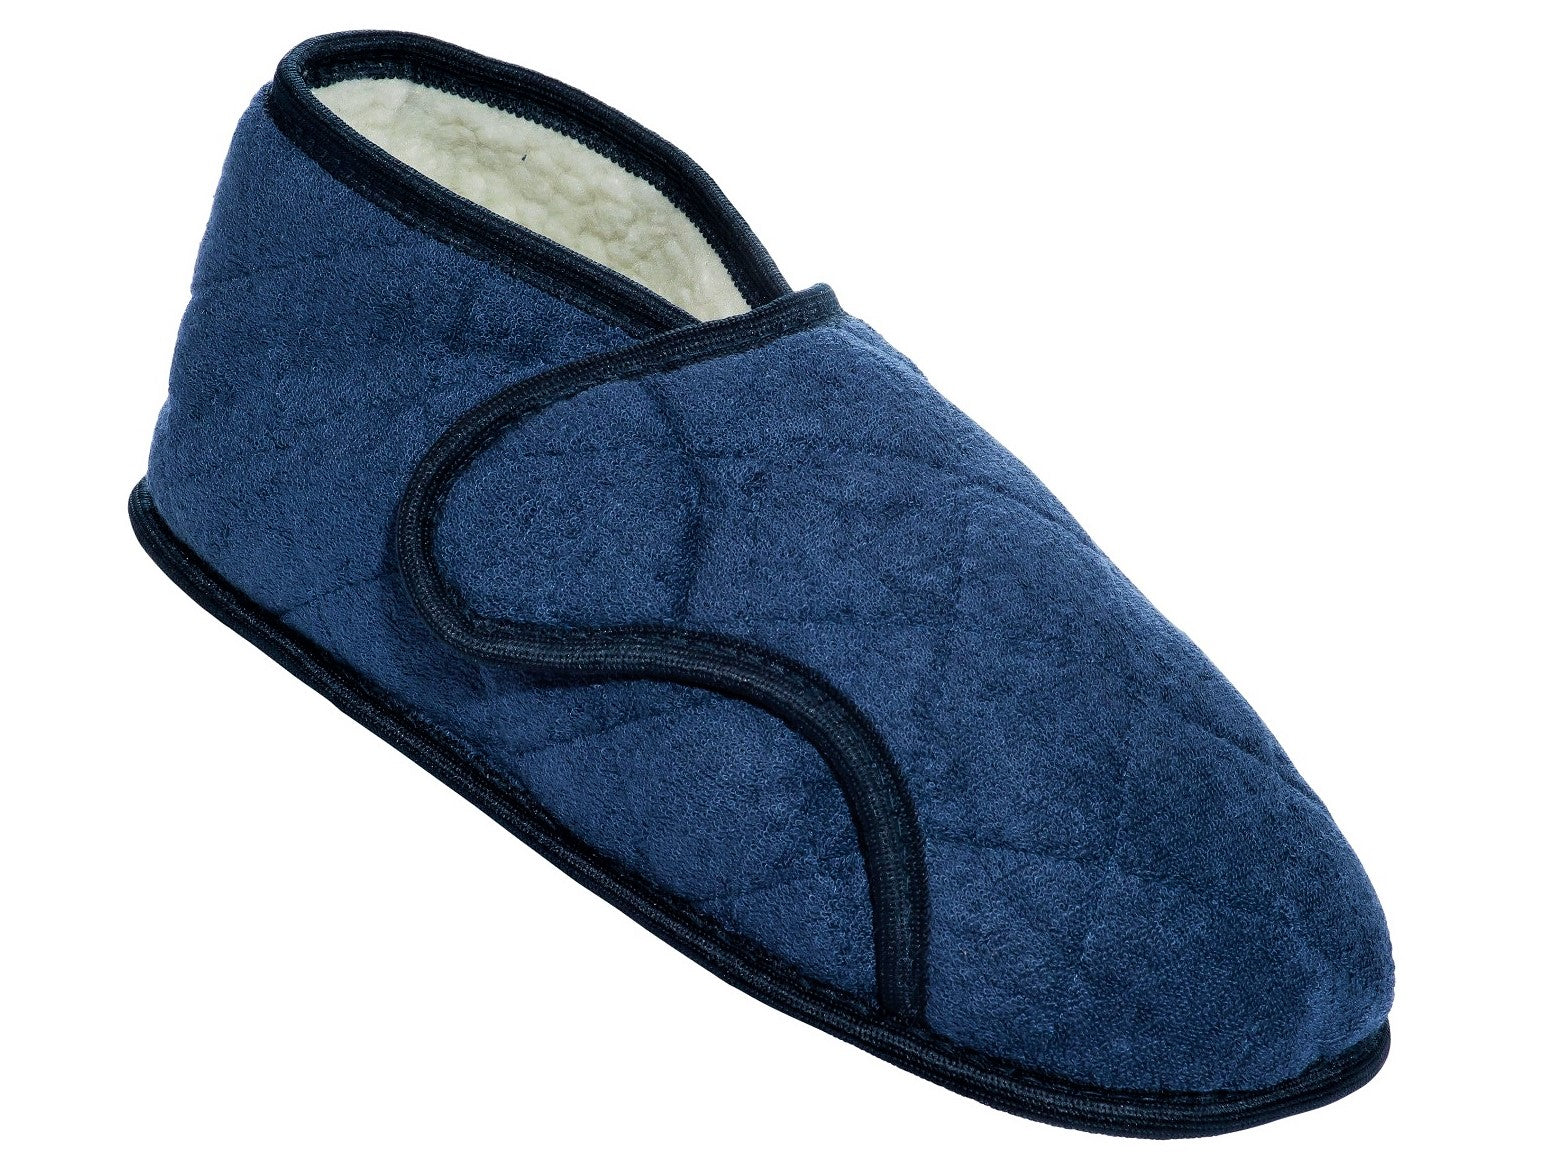 m & s mens slippers with velcro